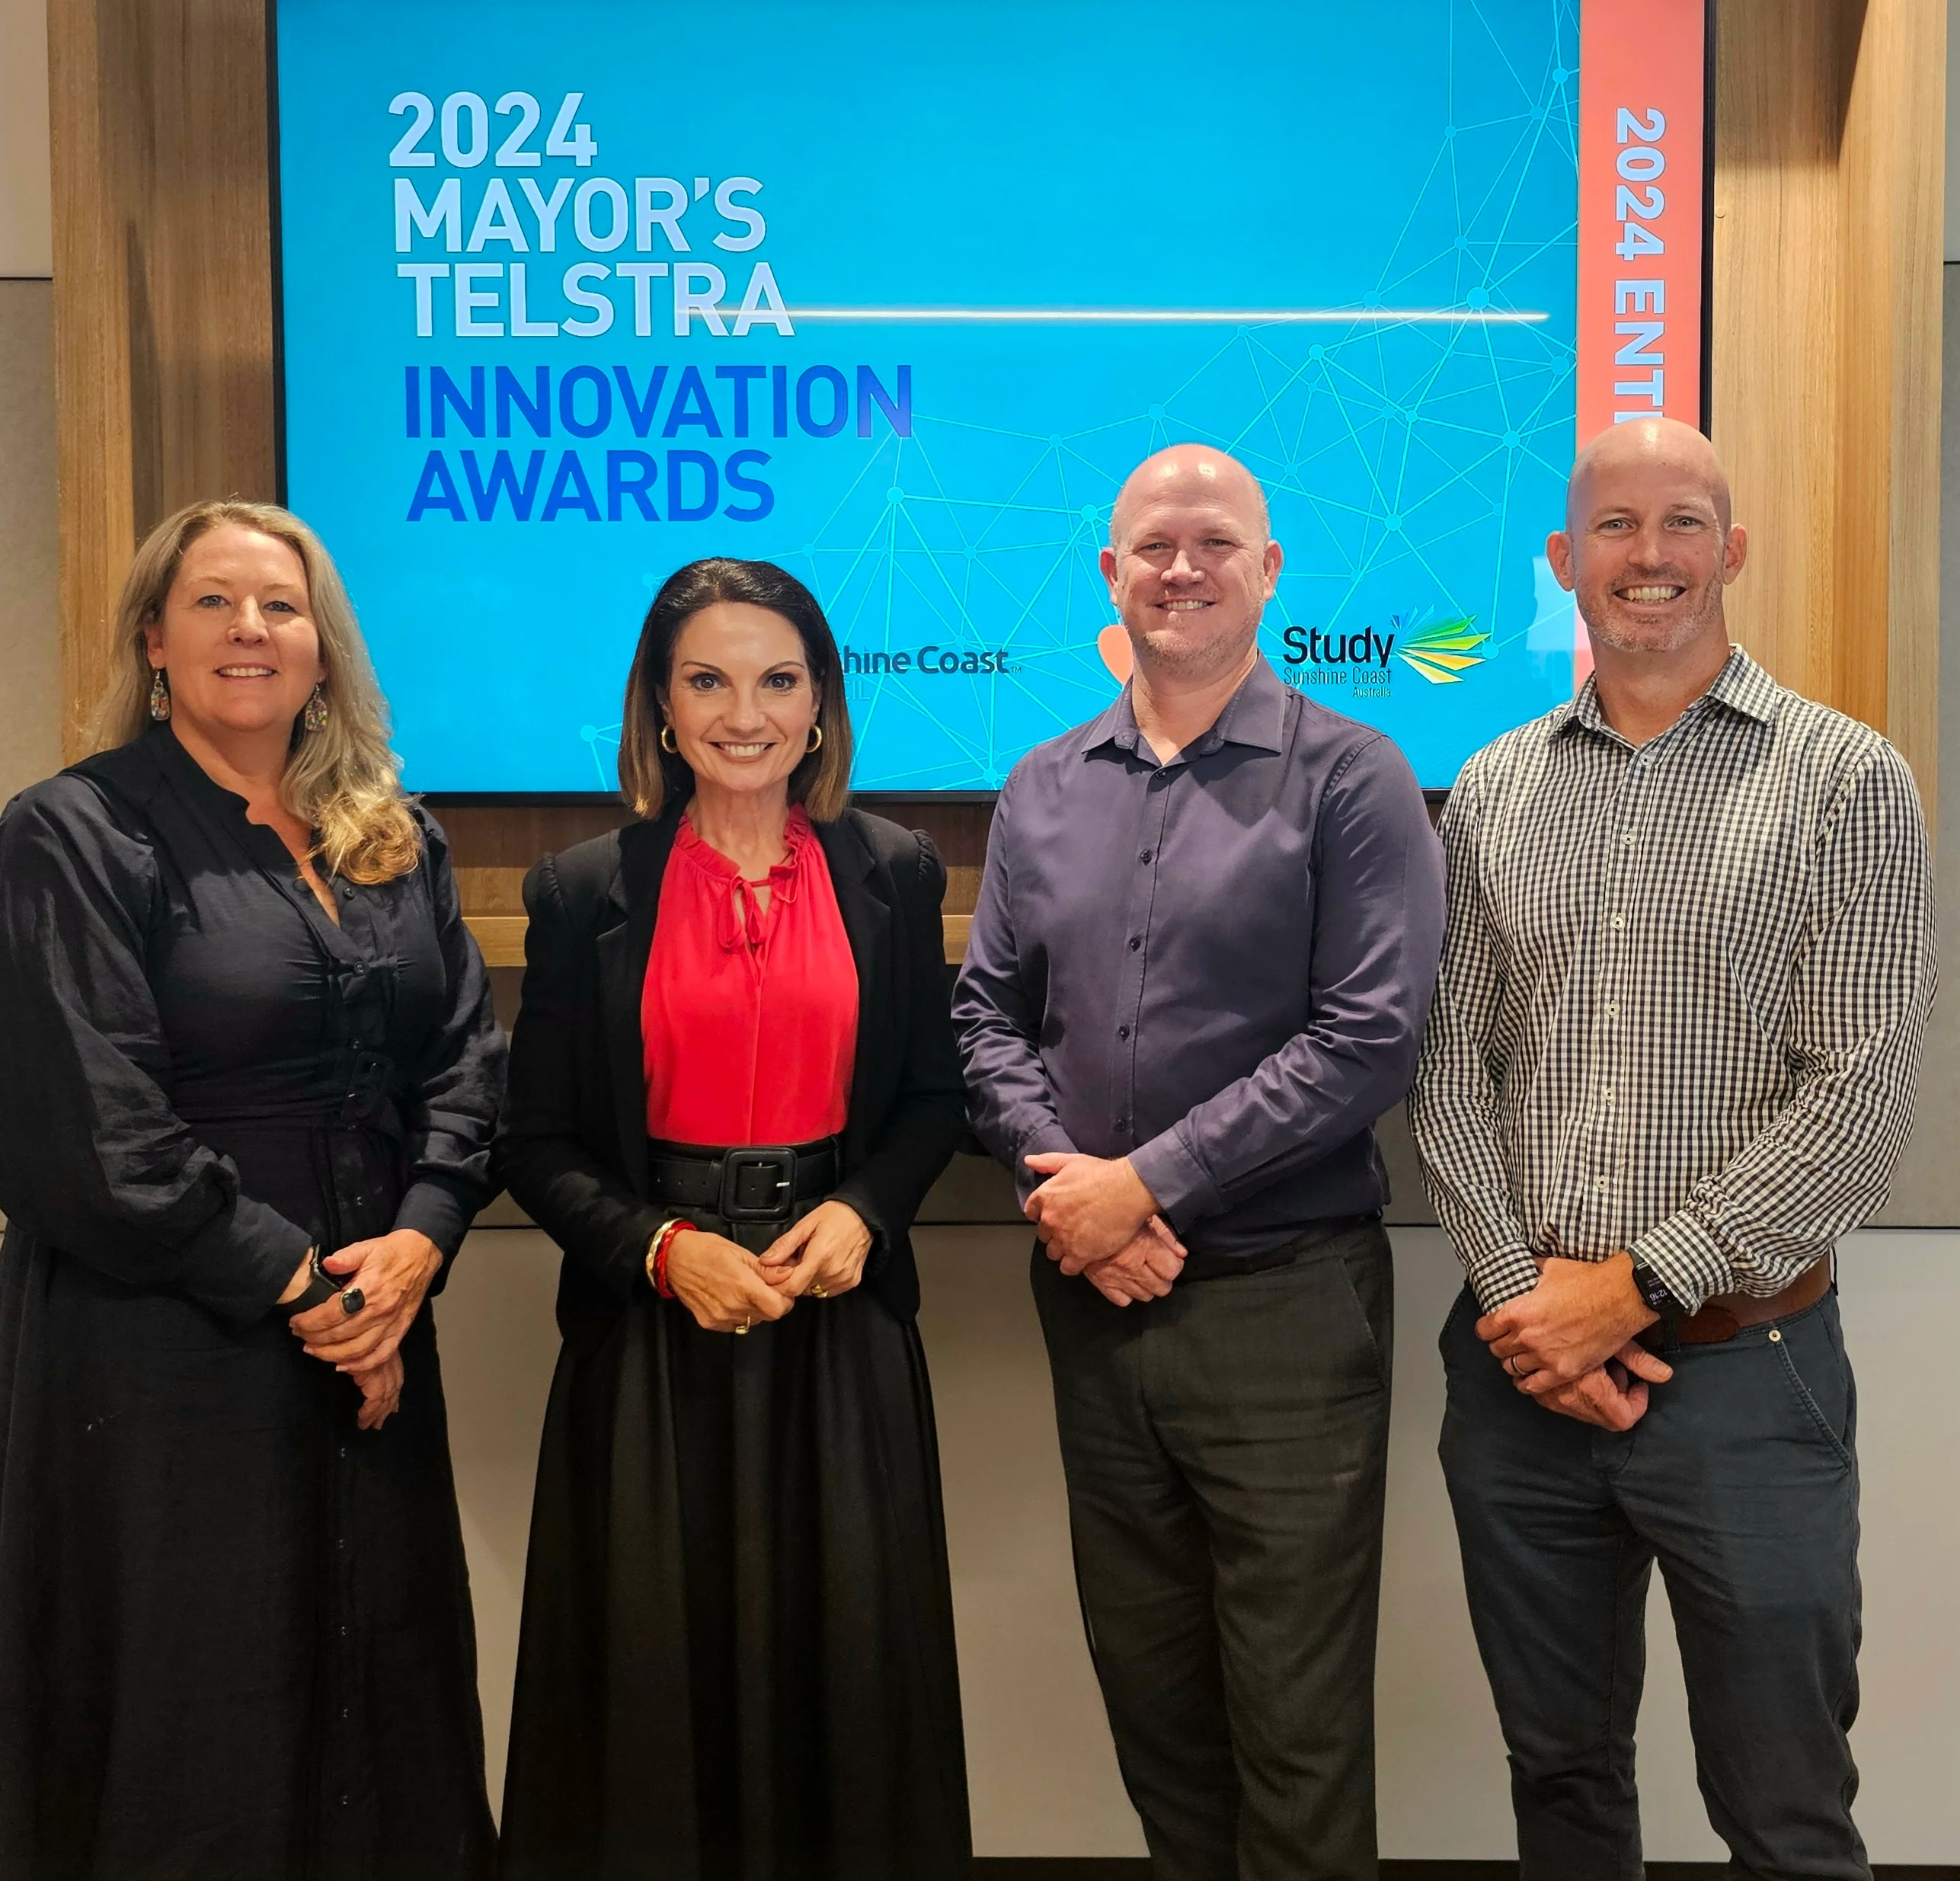 The judging panel from left to right: Groei Education program director Tara Jacobsen, Mayor Rosanna Natoli, Council Head of Business & Industry Development Tim McGee and Telstra Group Owner Digitisation Brent McArthur.